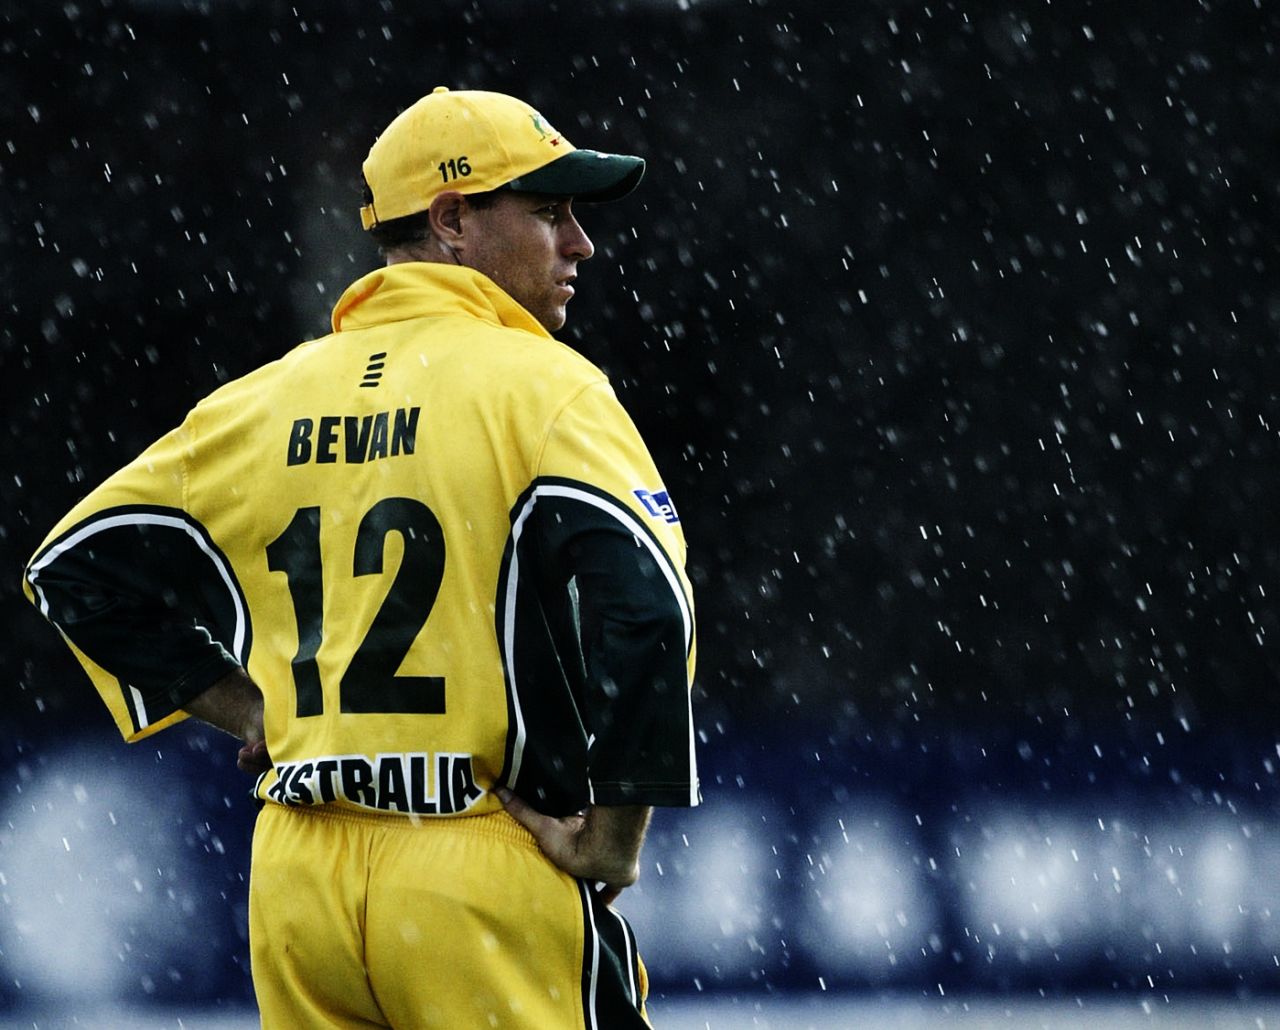 Michael Bevan stands in the rain, West Indies v Australia, 1st ODI, Kingston, May 17, 2003